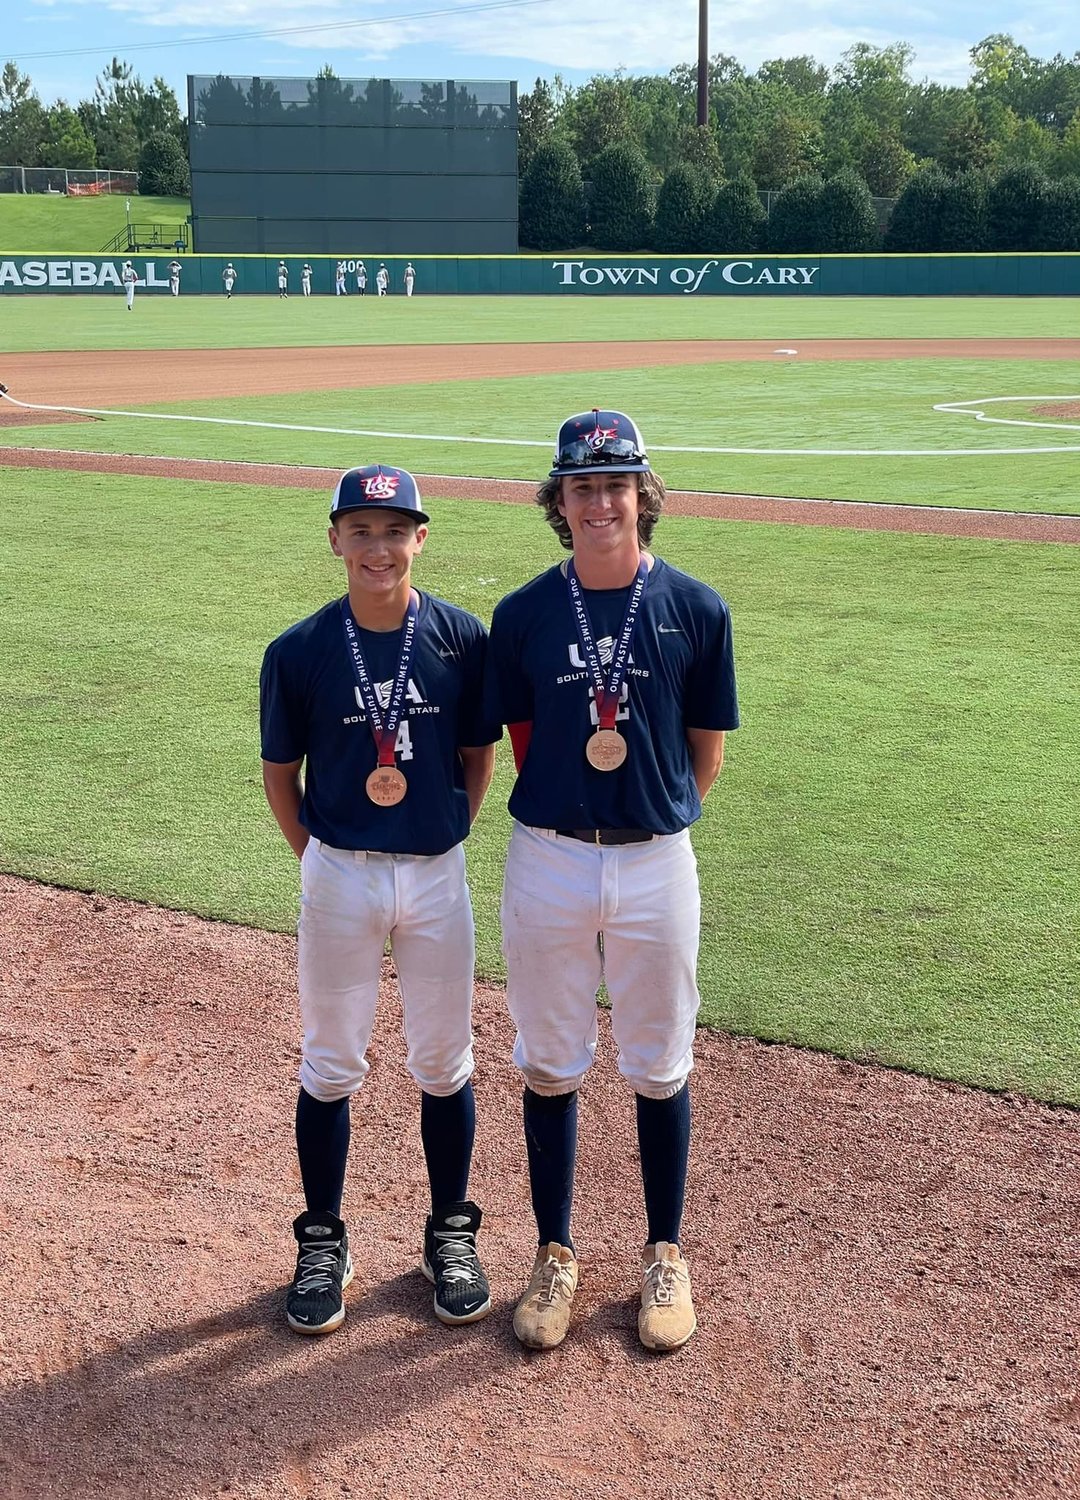 Congratulations! Pictured left to right, Hunter Fryman and Carson Adams make Marshfield and USA Baseball proud by bringing home bronze  during the 2022 USA Baseball NTIS. The two played in Cary, NC, in the home of USA Baseball.